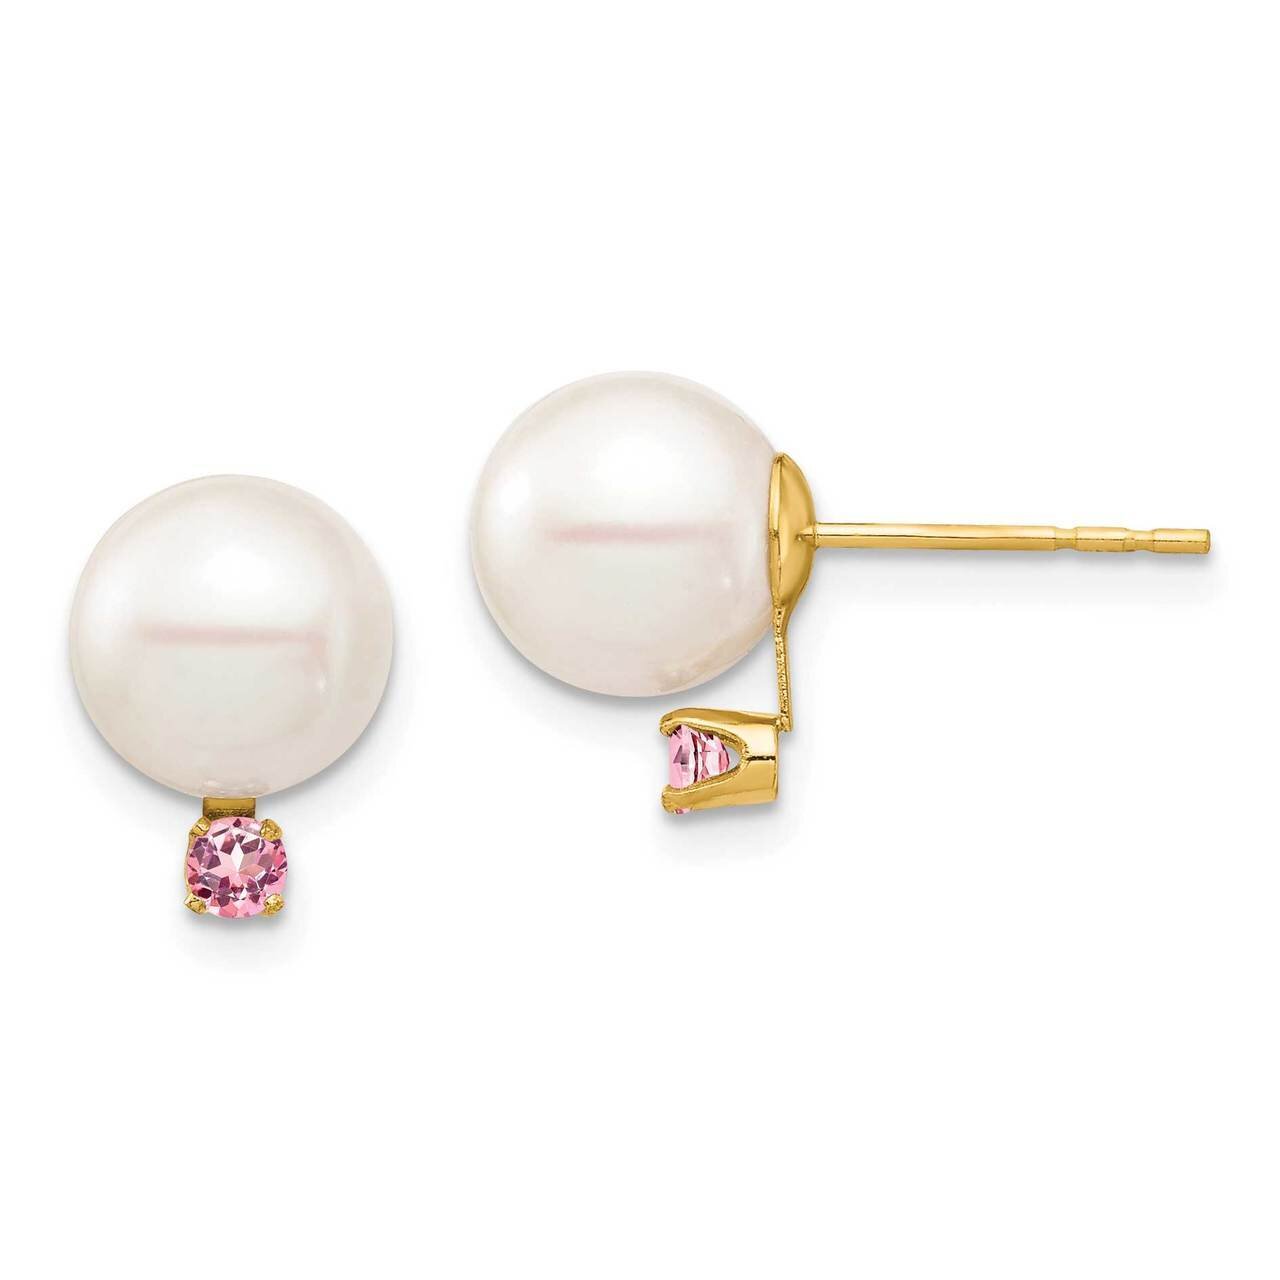 8-8.5mm White Round Freshwater Cultured Pearl Pink Topaz Post Earrings 14k Gold XF754E_PT